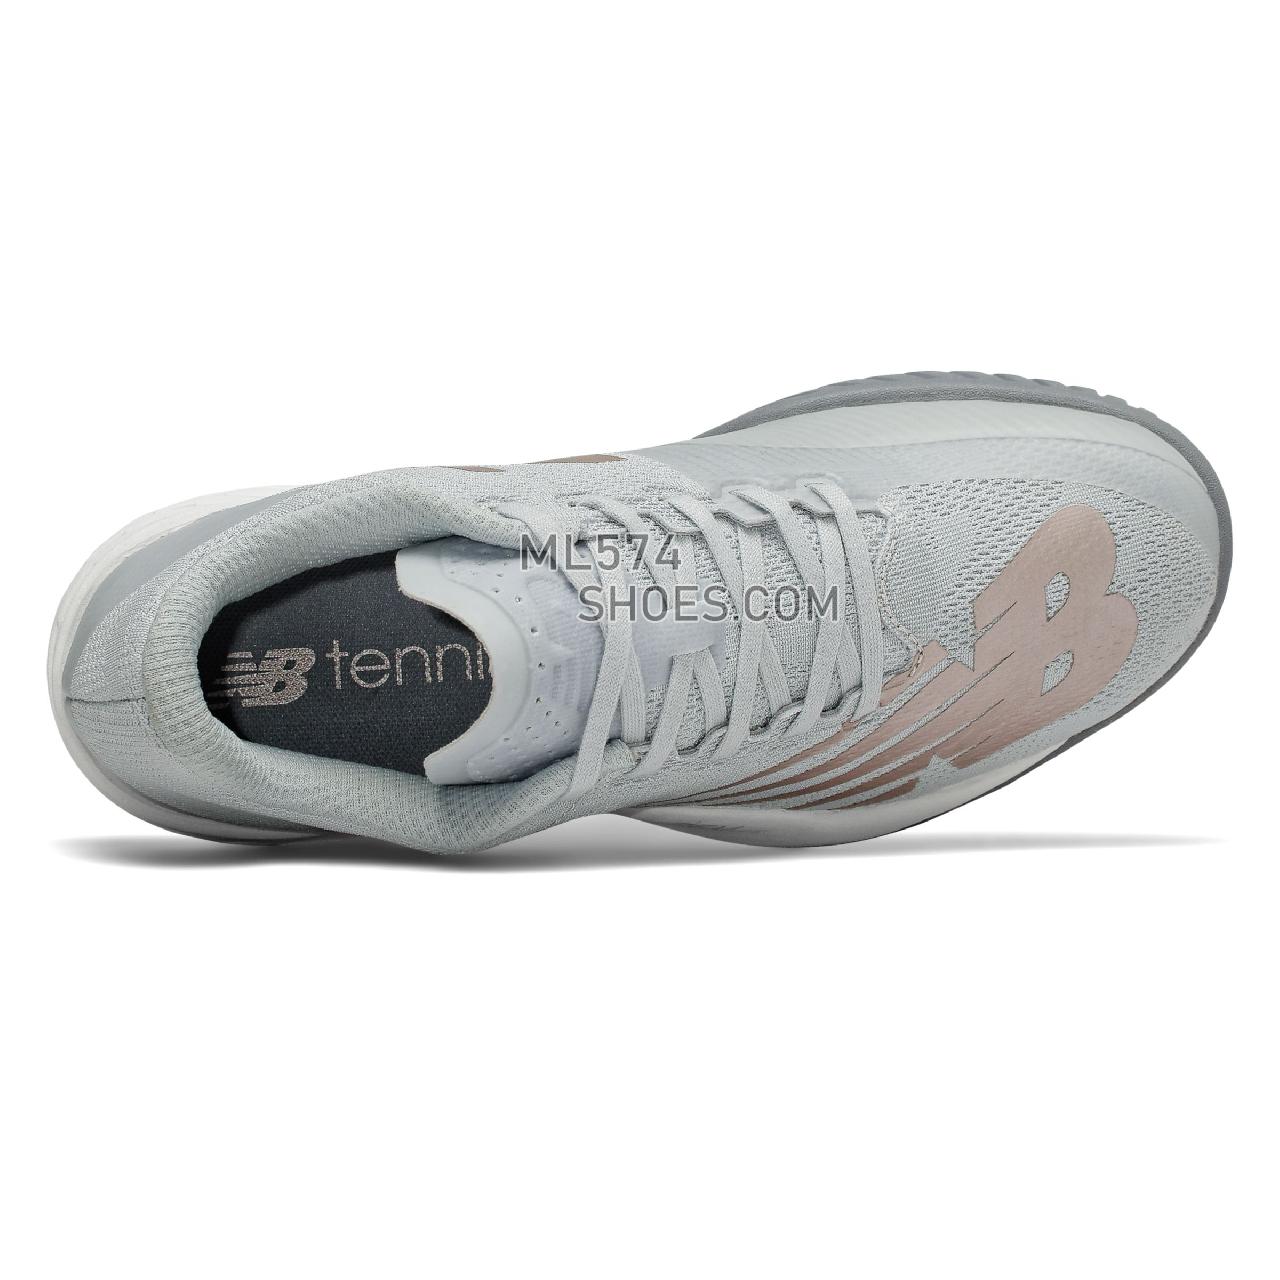 New Balance 896v3 - Women's Tennis - Grey with Champagne and Light Mango - WCH896M3